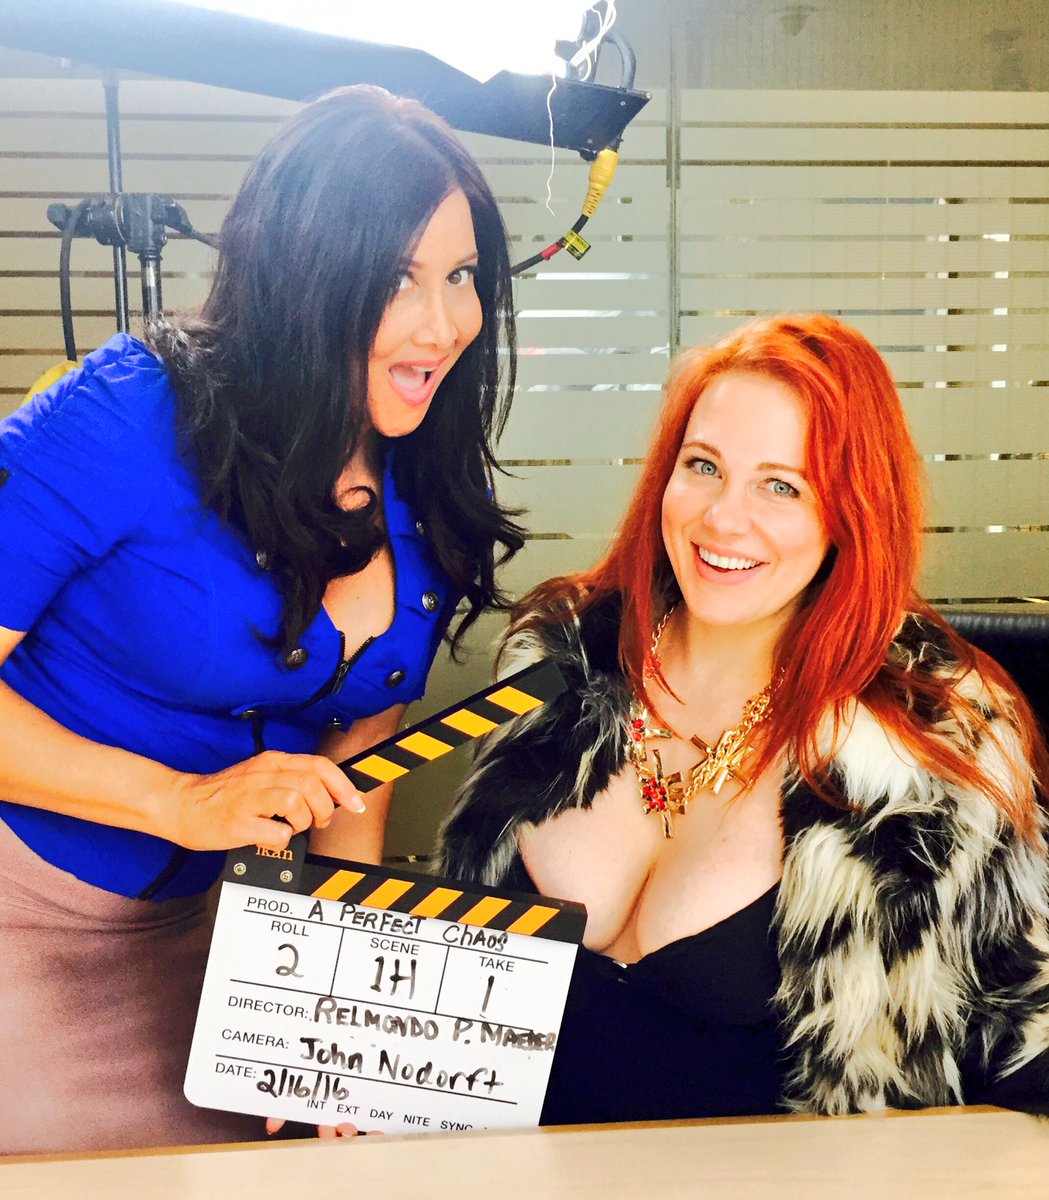 Boob Clap! ????????RT @deanamolle1: #aperfectchaos on set @MaitlandWard #filming #comedy #containerwars #ocgolddiggers https://t.co/l5WcYrHPKy